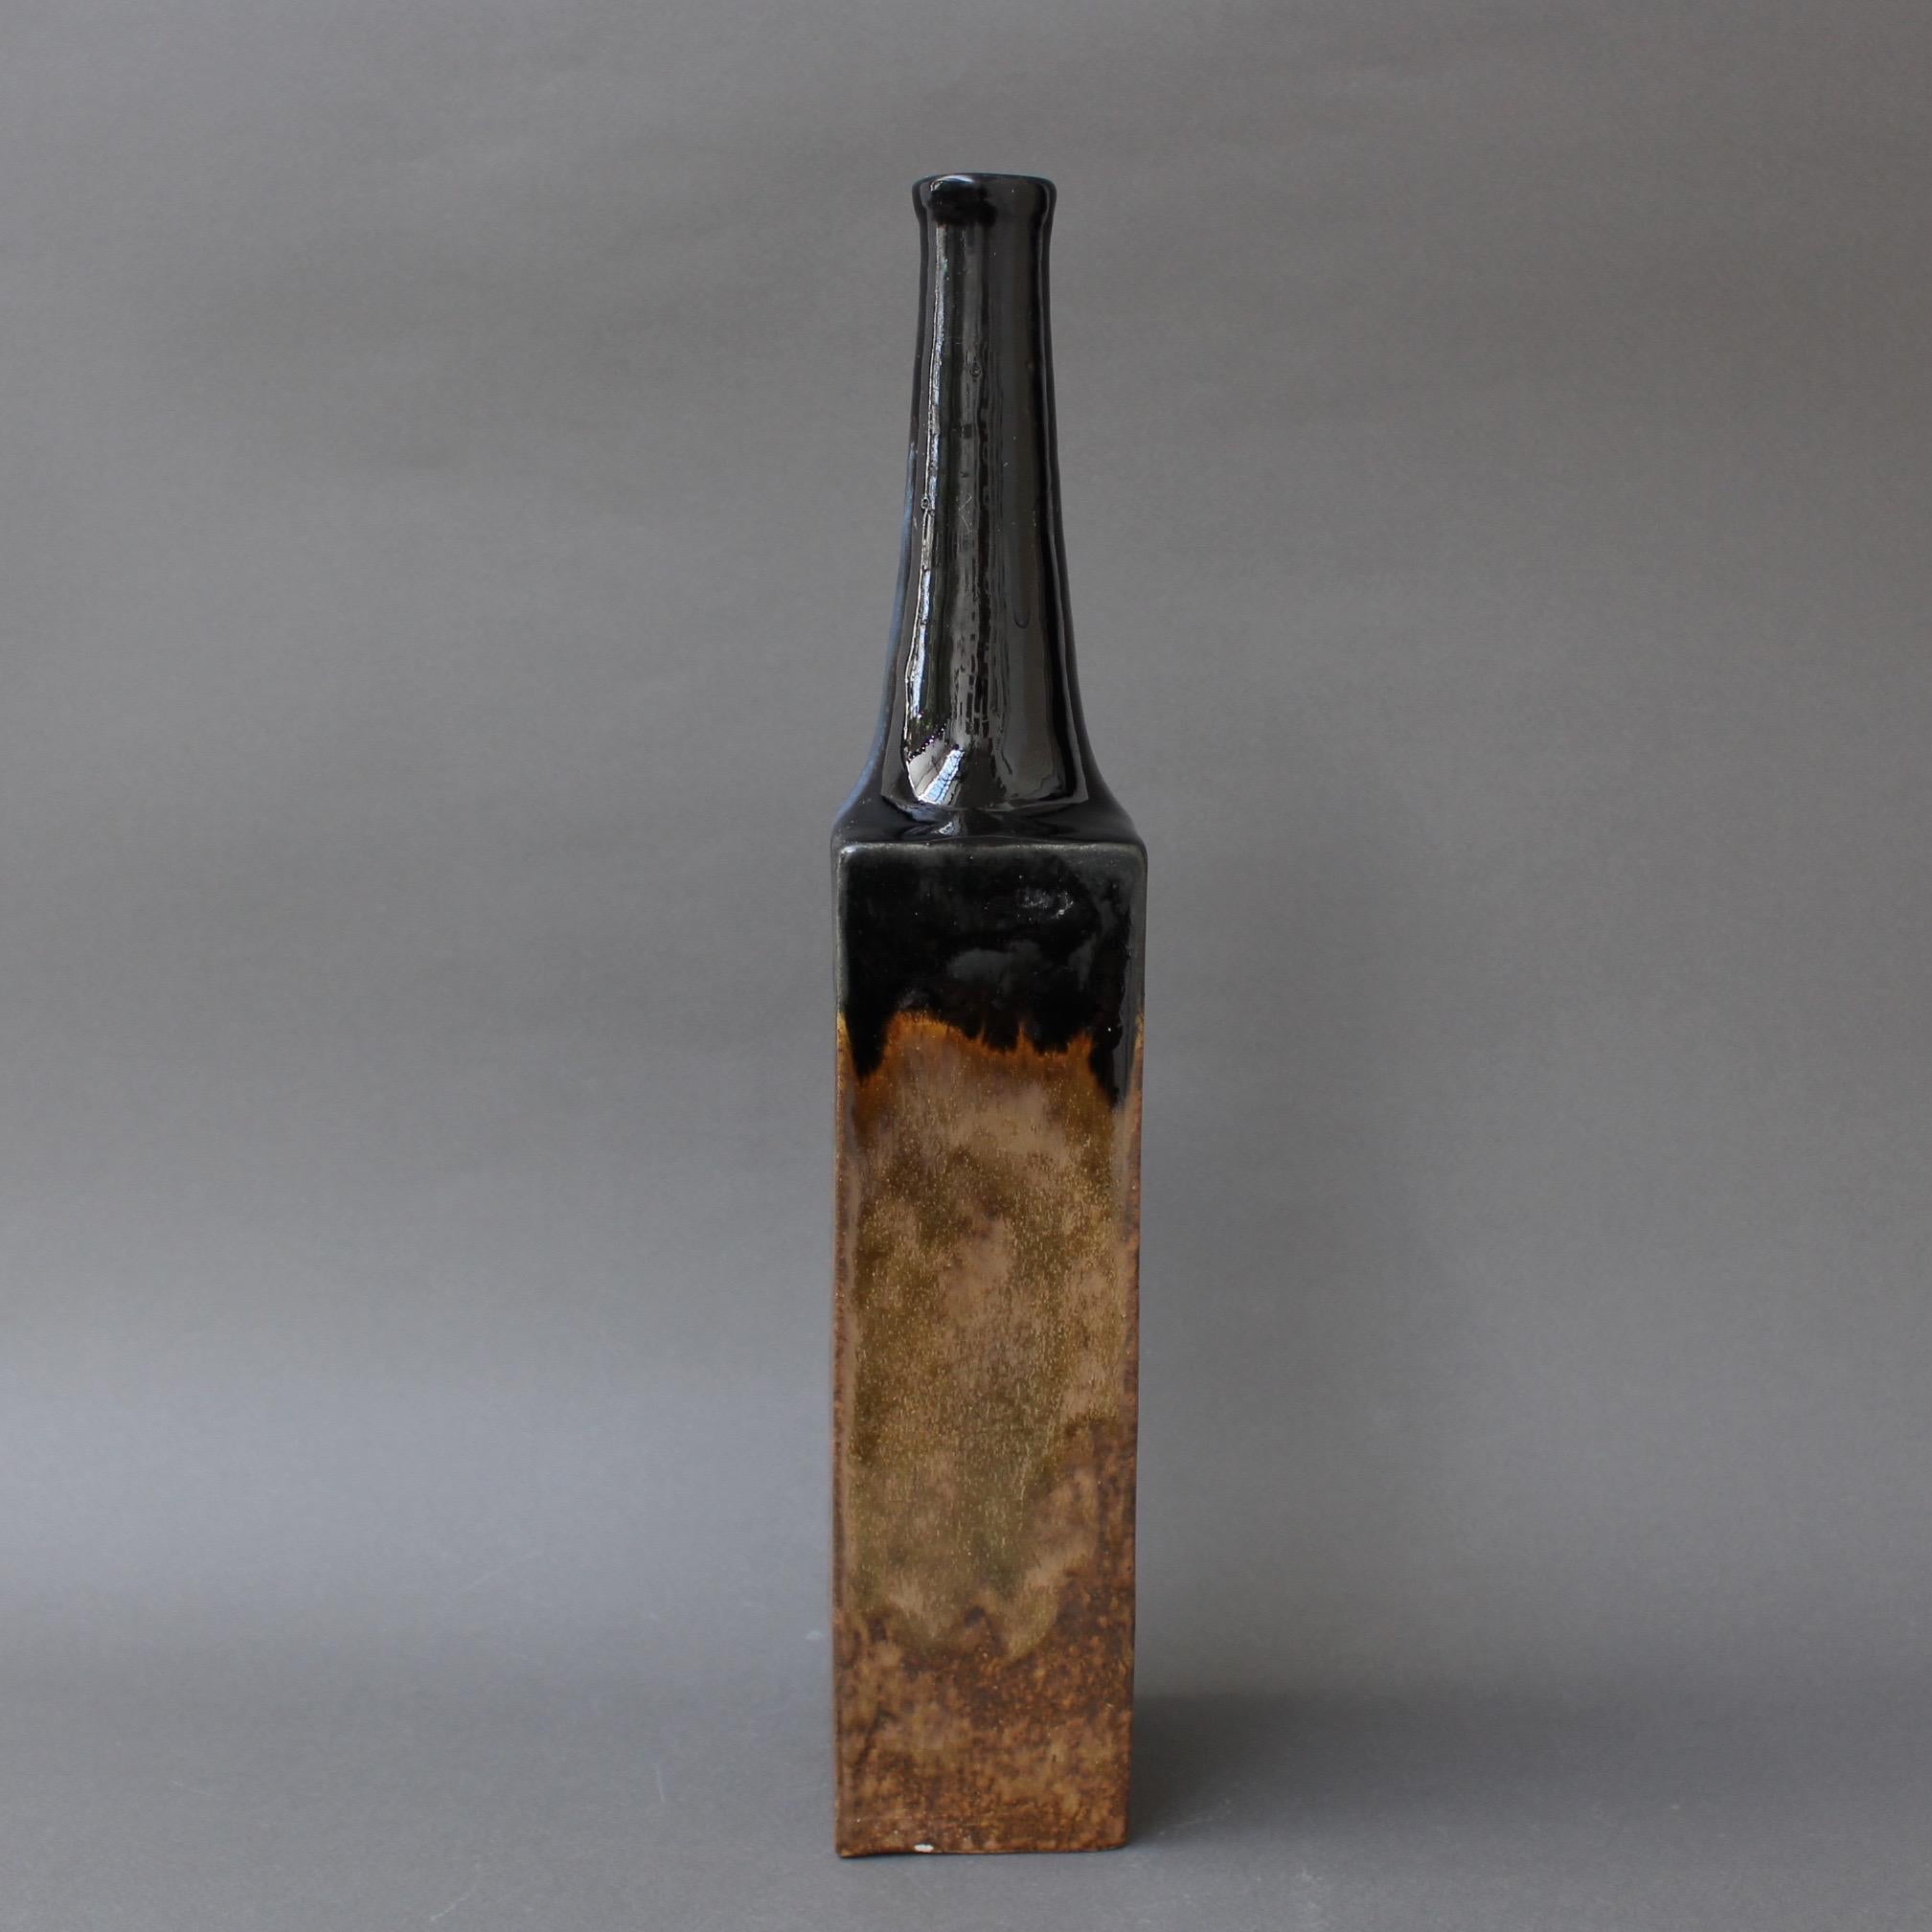 Minimalist Black and Chocolate Brown Ceramic Bottle-Shaped Vase by Bruno Gambone, c. 1980s For Sale